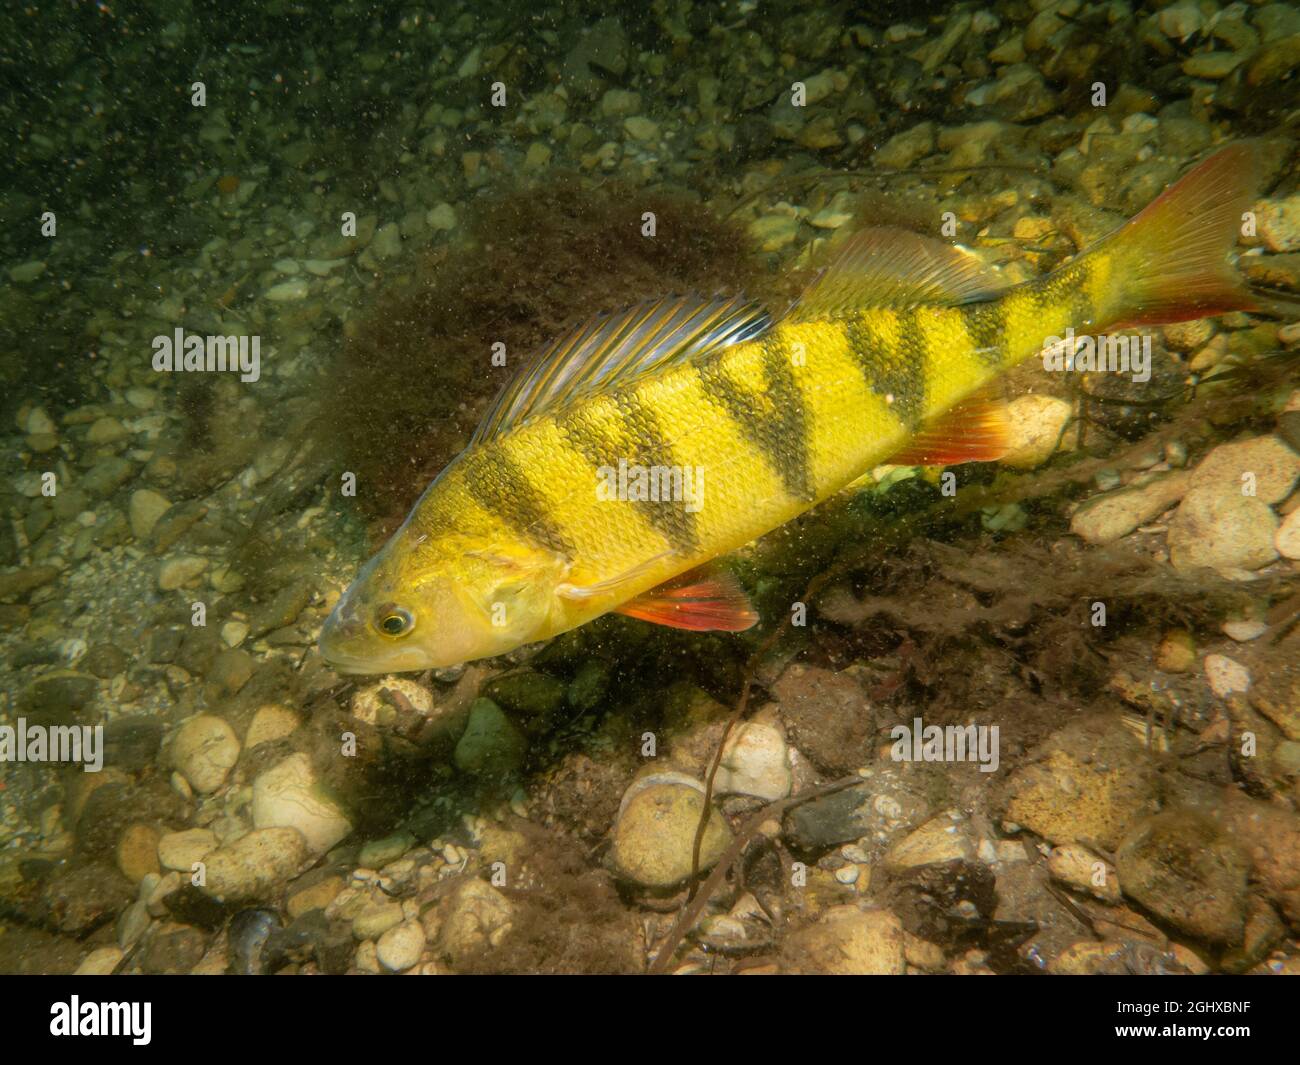 A close-up picture of a European perch, Perca fluviatilis, in cold Northern European waters. Pebbles in the background Stock Photo